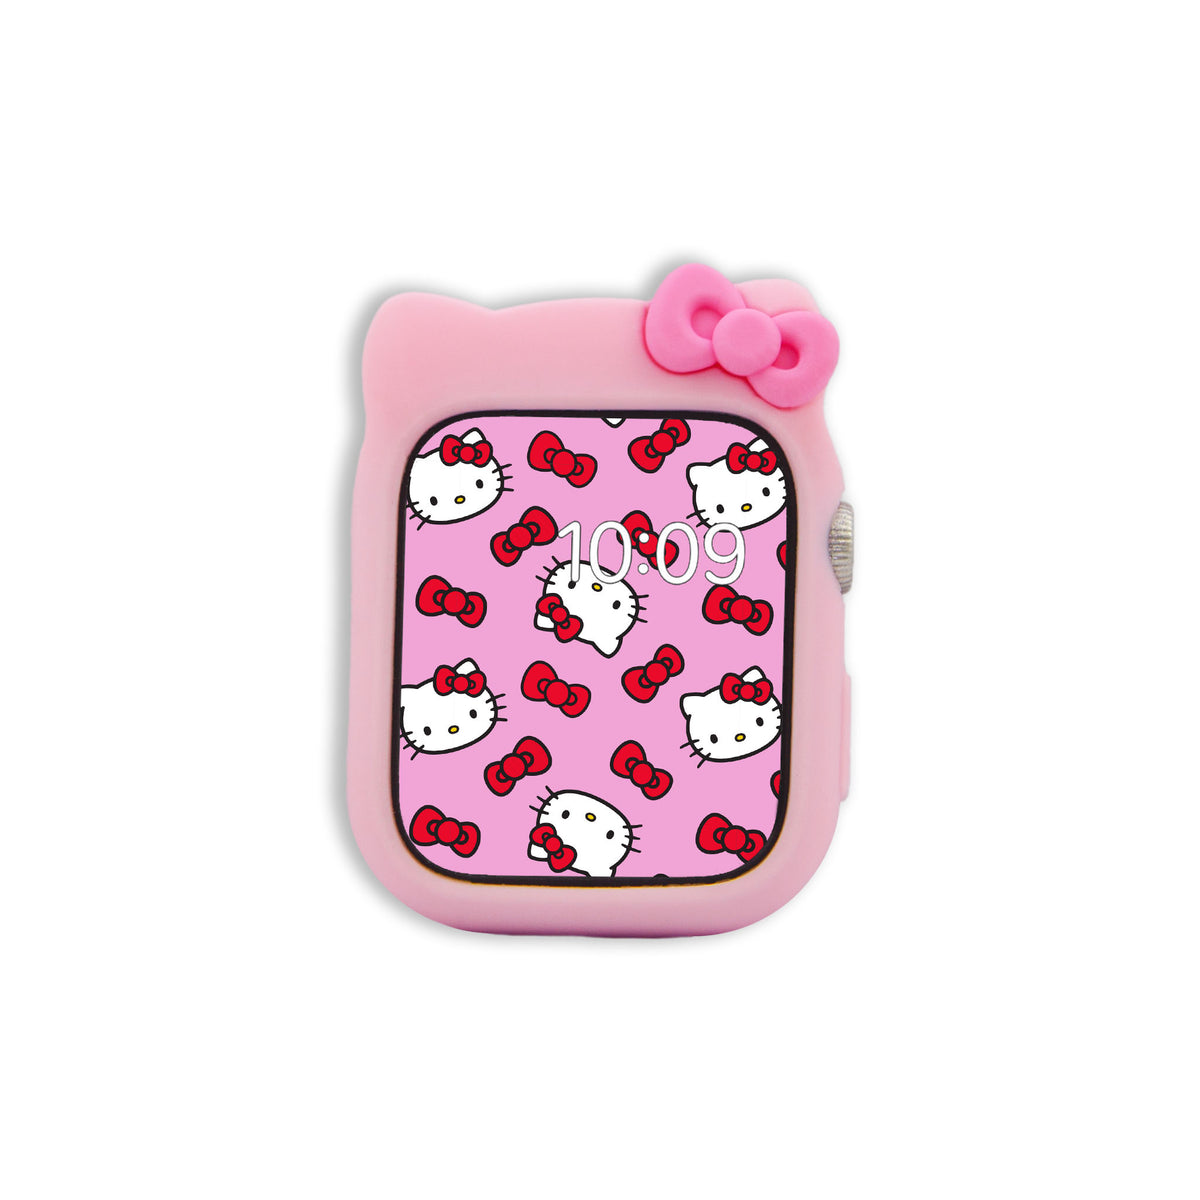 Buy La Classe Watches Classy Hello Kitty Analog Watch for Girls (Pink-) at  Amazon.in